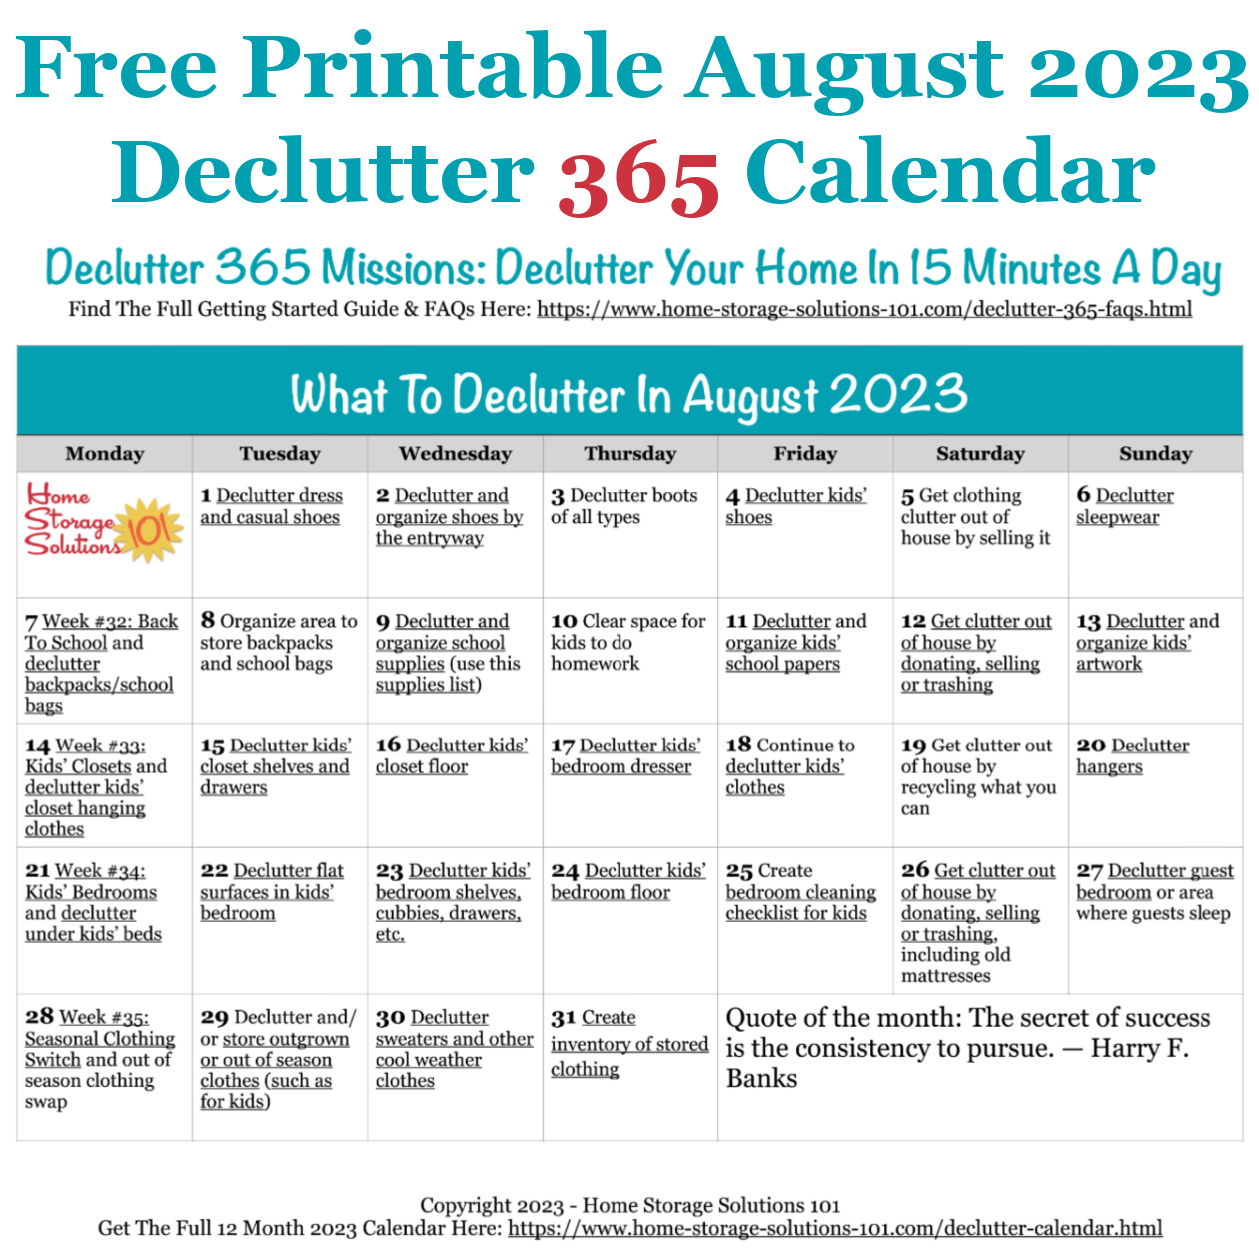 August Declutter 365 Calendar 15 Minute Daily Missions For Month